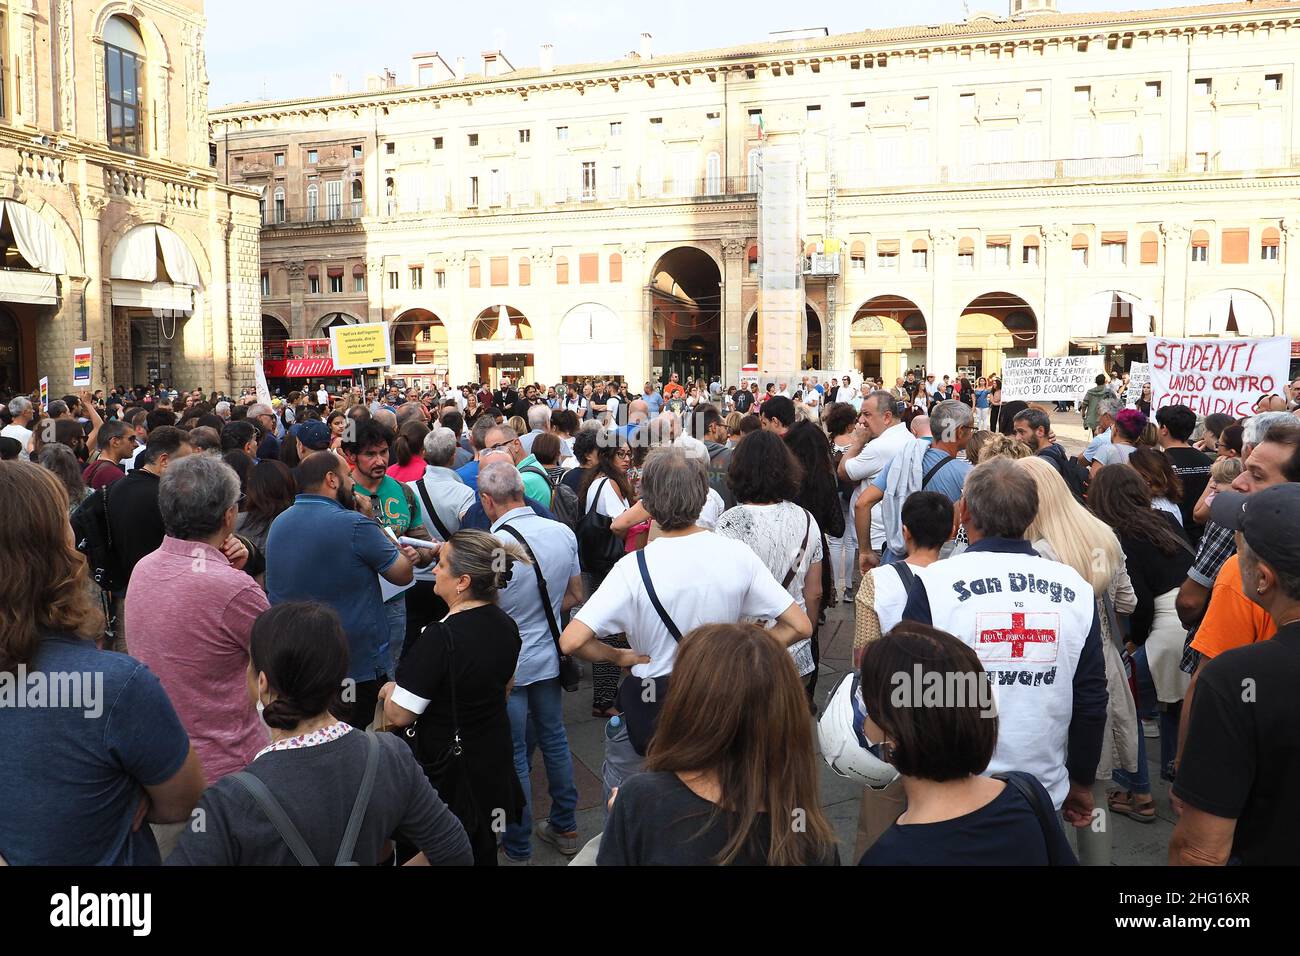 Michele Nucci/LaPresse September 04, 2021 - Bologna, Italy News Demonstrations against vaccine passes or virus restrictions in general in Piazza Maggiore. Stock Photo